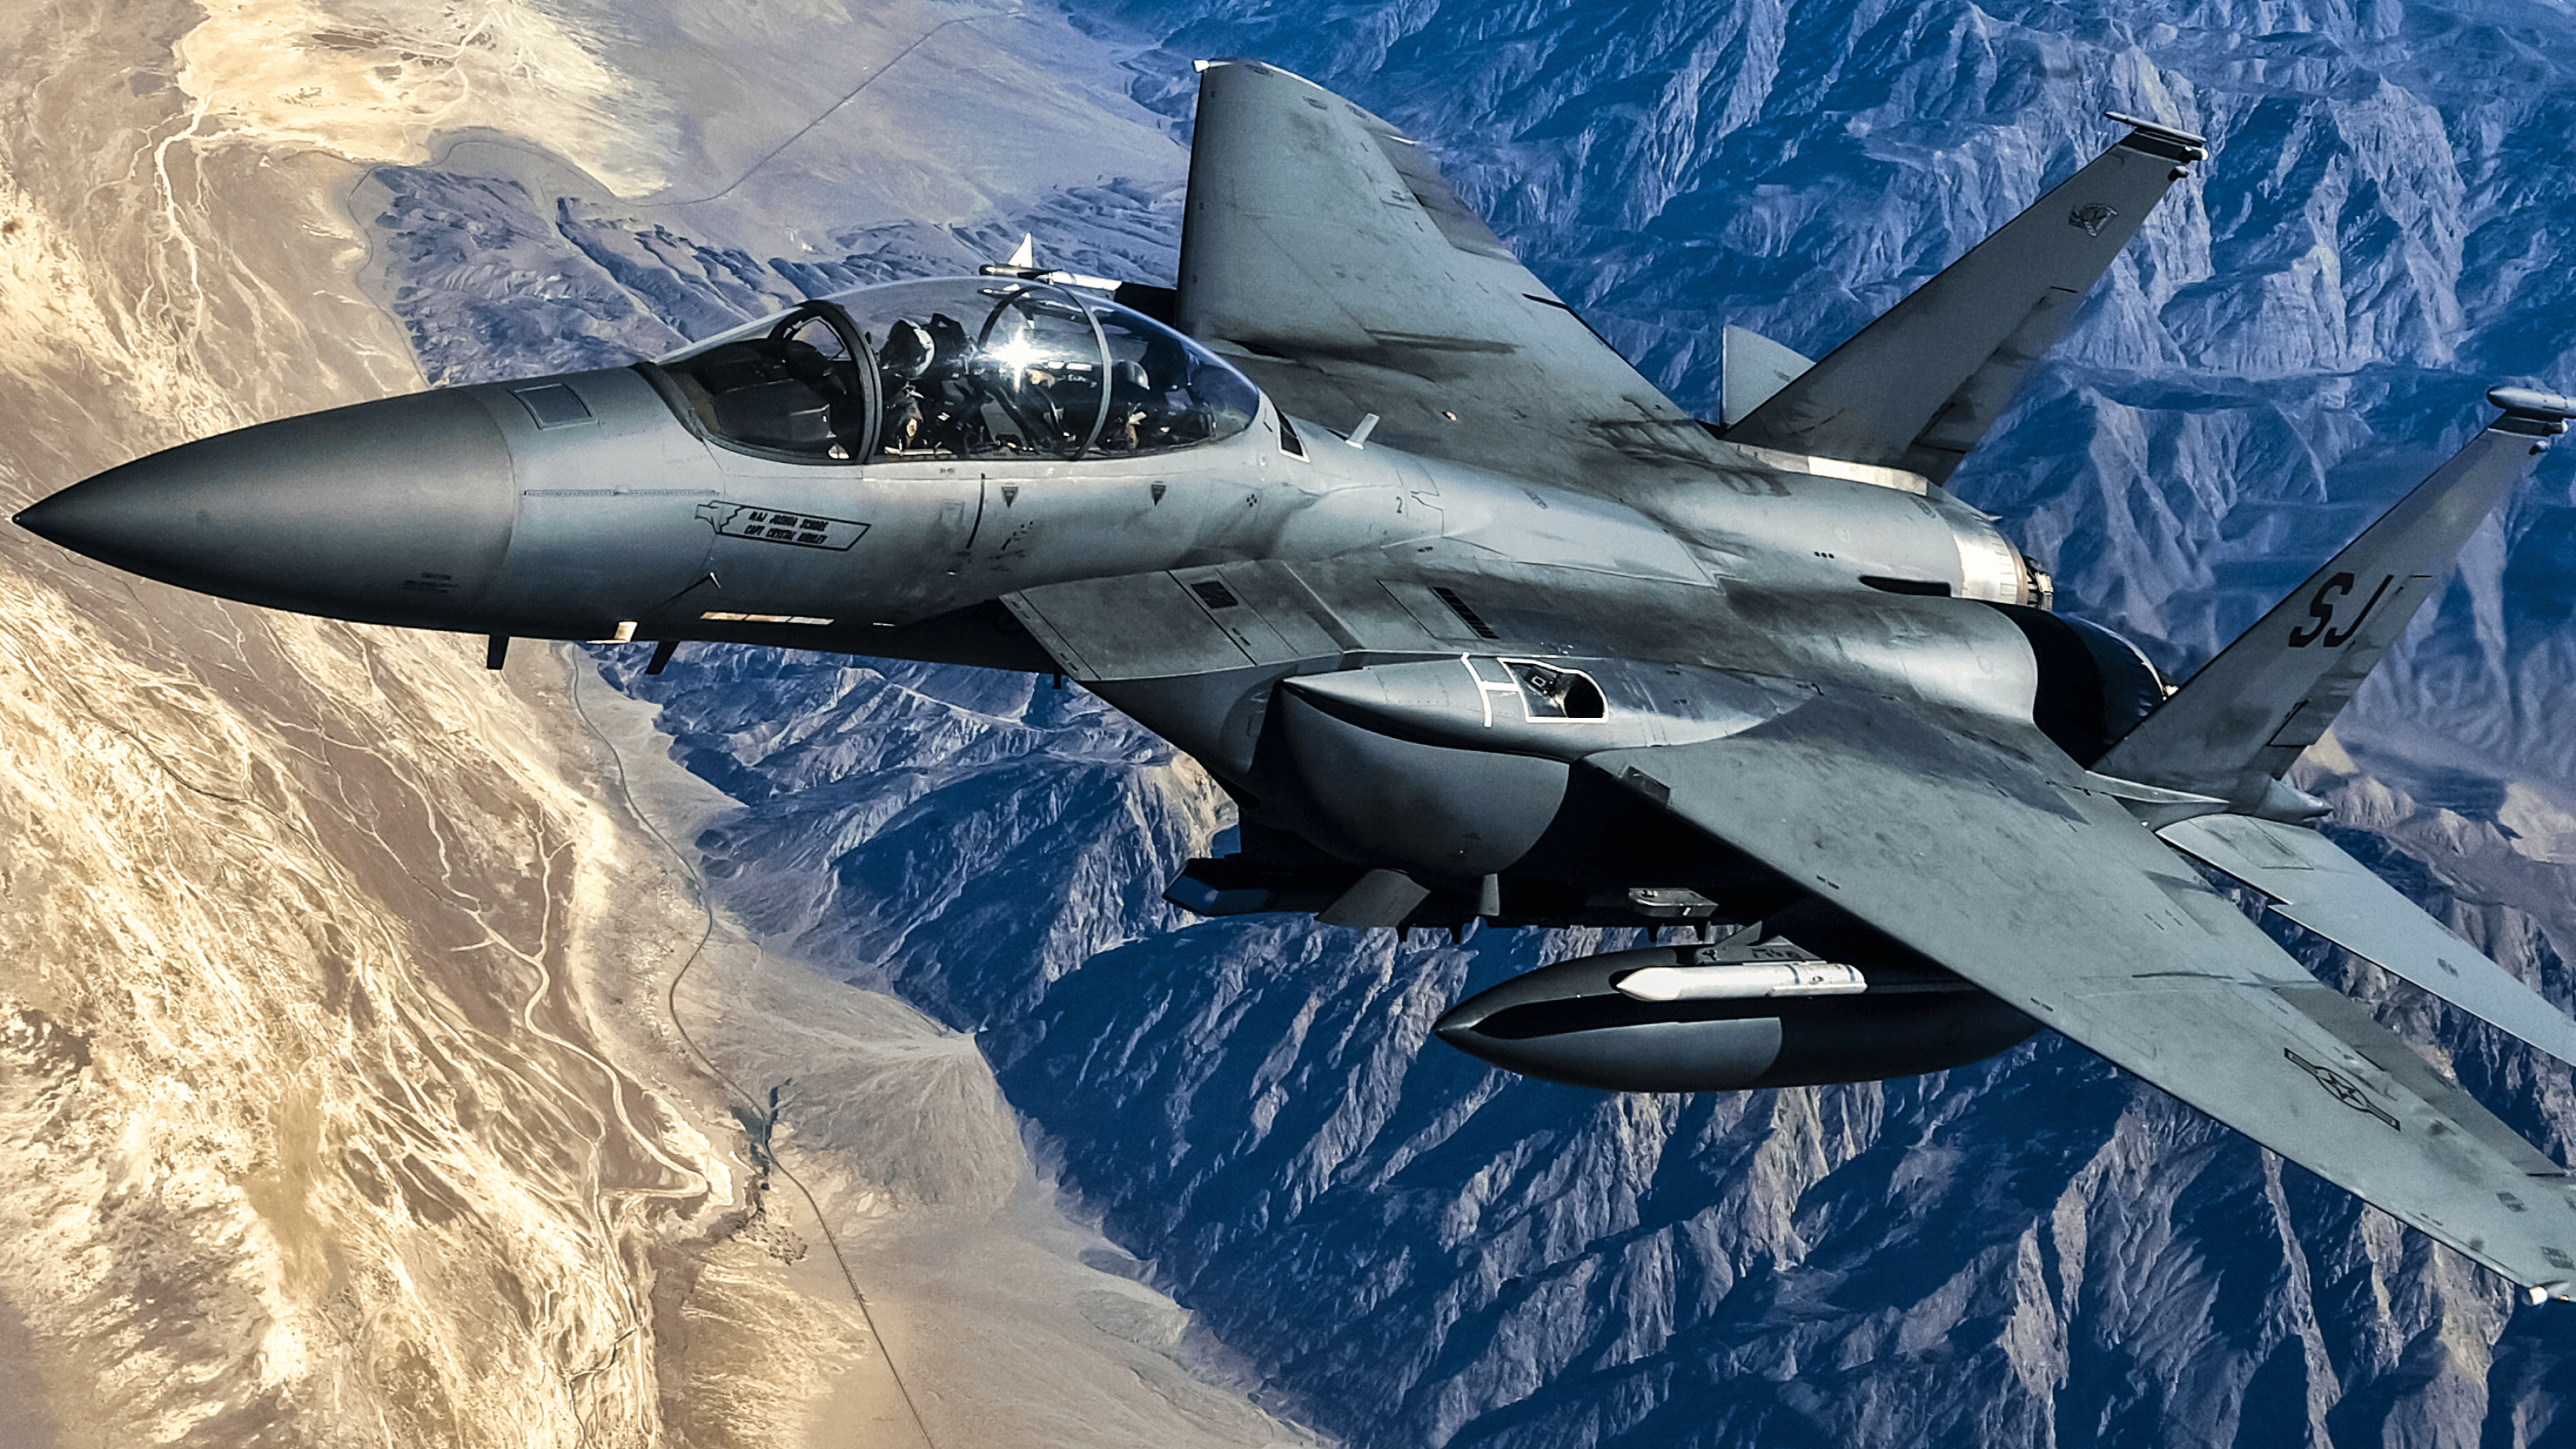 Fighter jets, Aerial superiority, Thunderous engines, Combat-ready aircrafts, High-altitude warfare, 3840x2160 4K Desktop